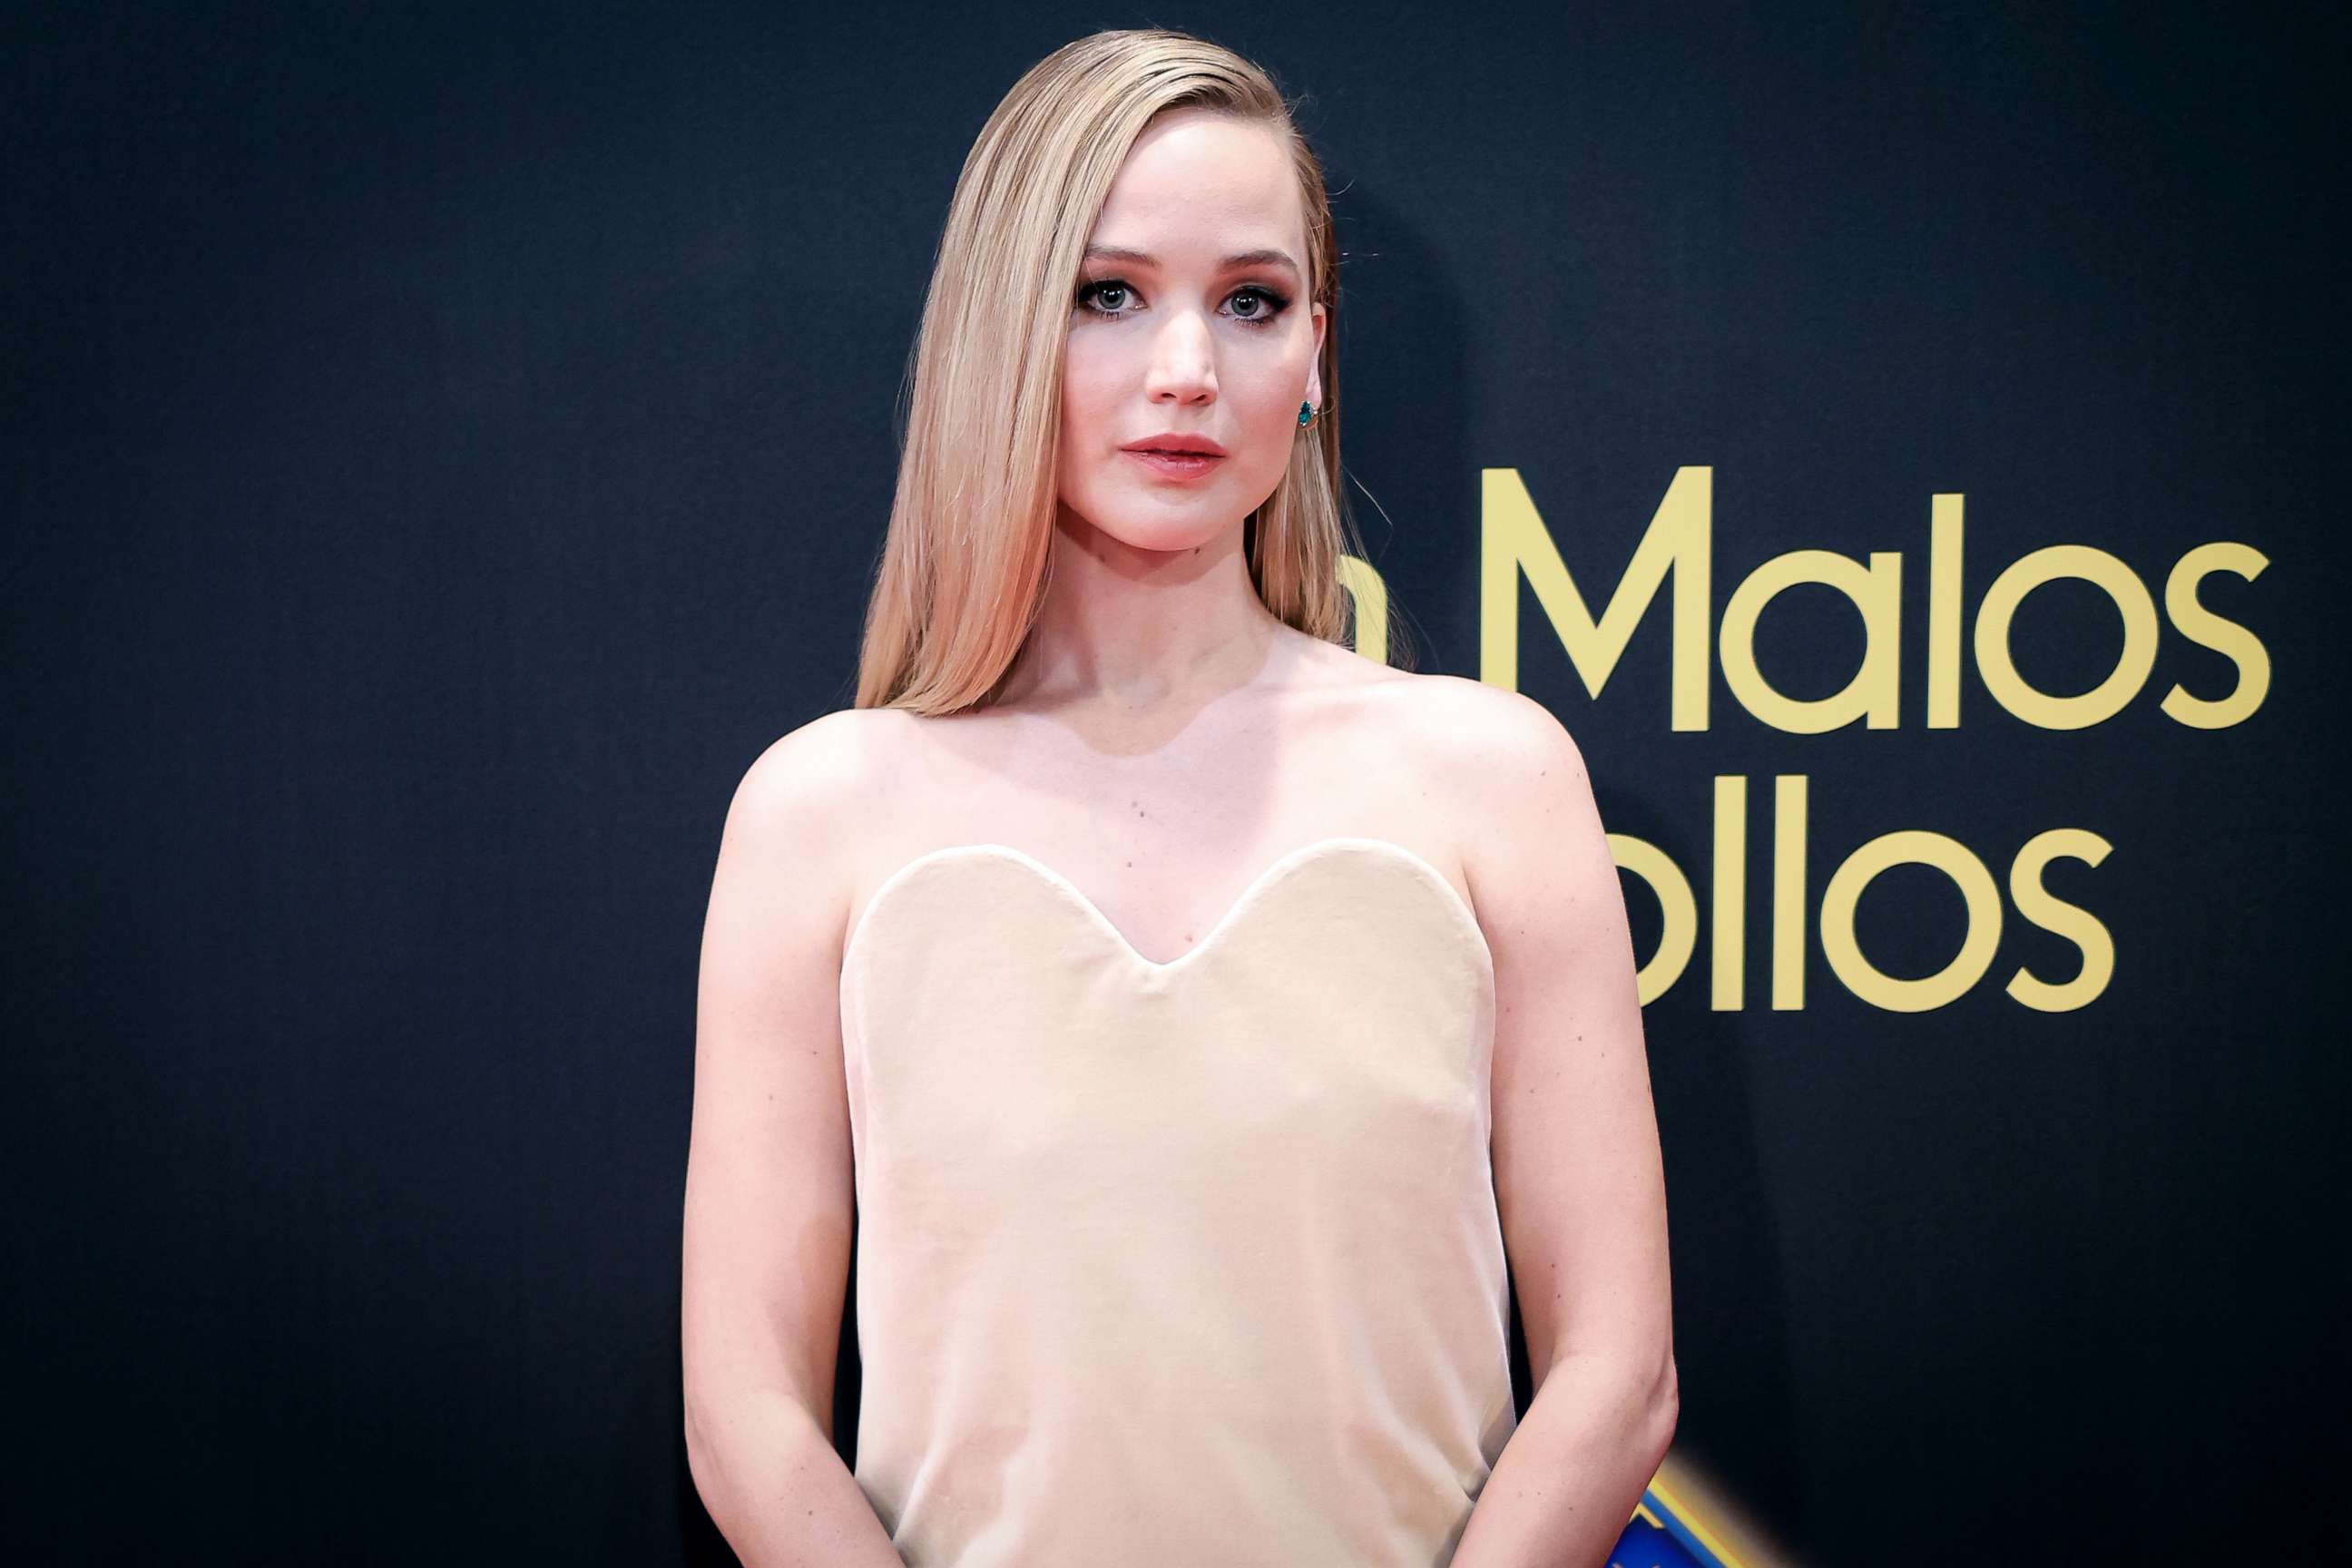 PHOTO: Jennifer Lawrence attends the premiere of "Sin Malos Rollos" at AlcalÃ¡ 516 on June 14, 2023 in Madrid.